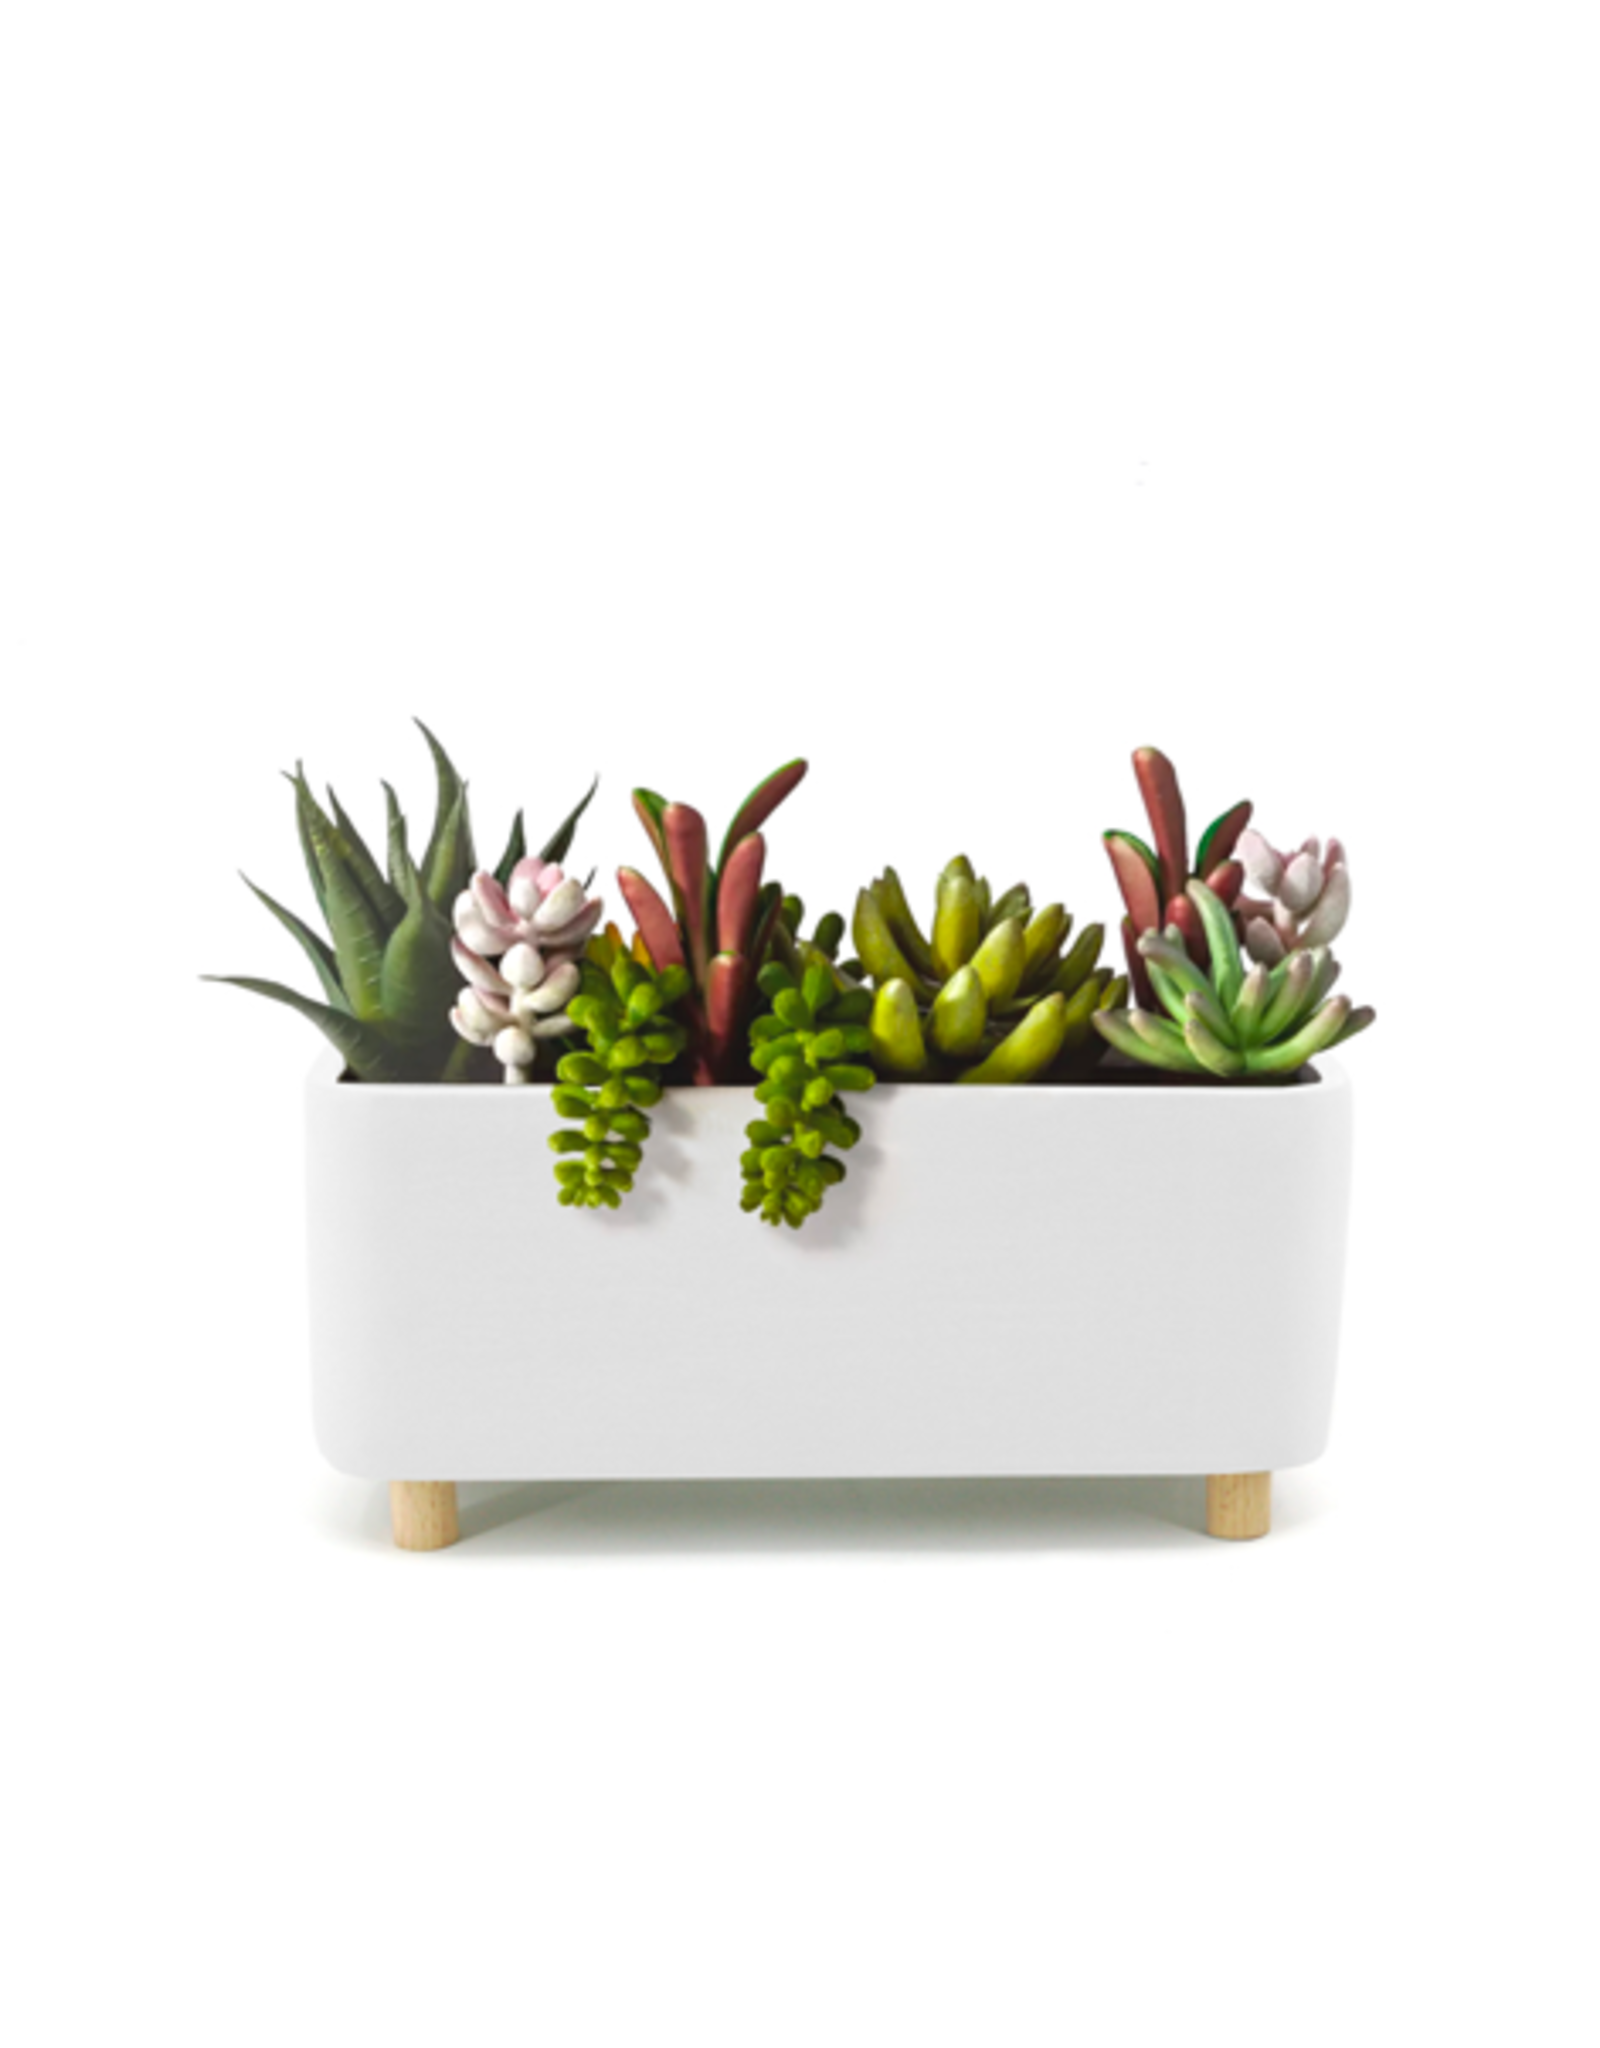 DCO - Footed Planter / Oblong, White, 7''